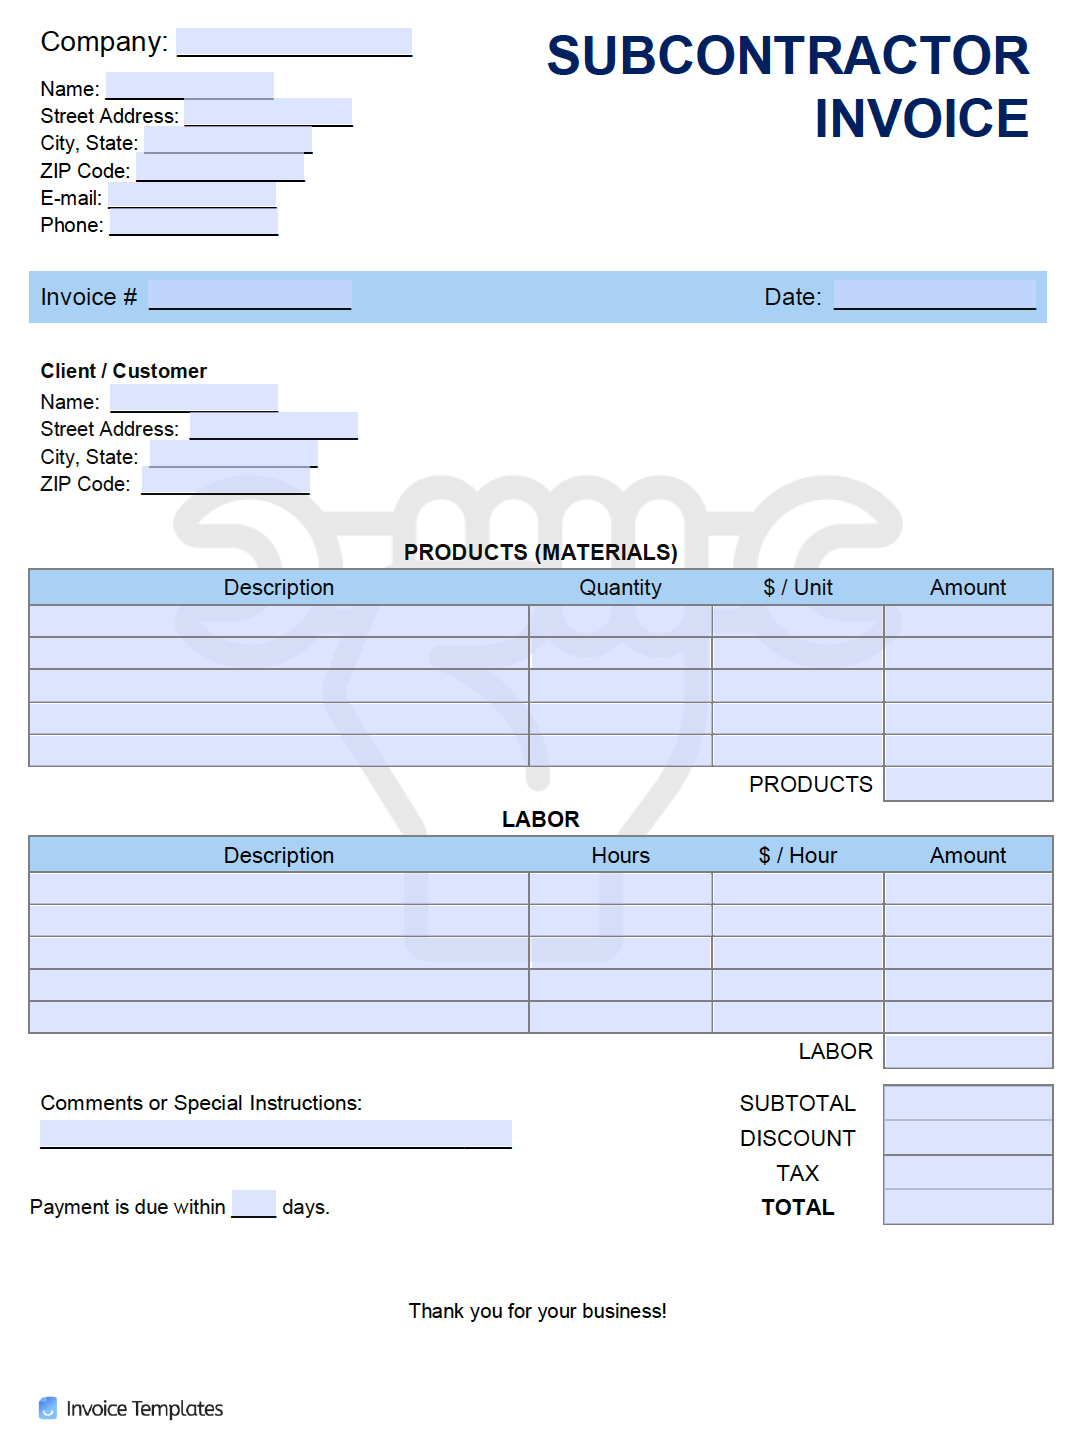 Free Subcontractor Invoice Template  PDF  WORD  EXCEL Throughout Contractor Invoices Templates